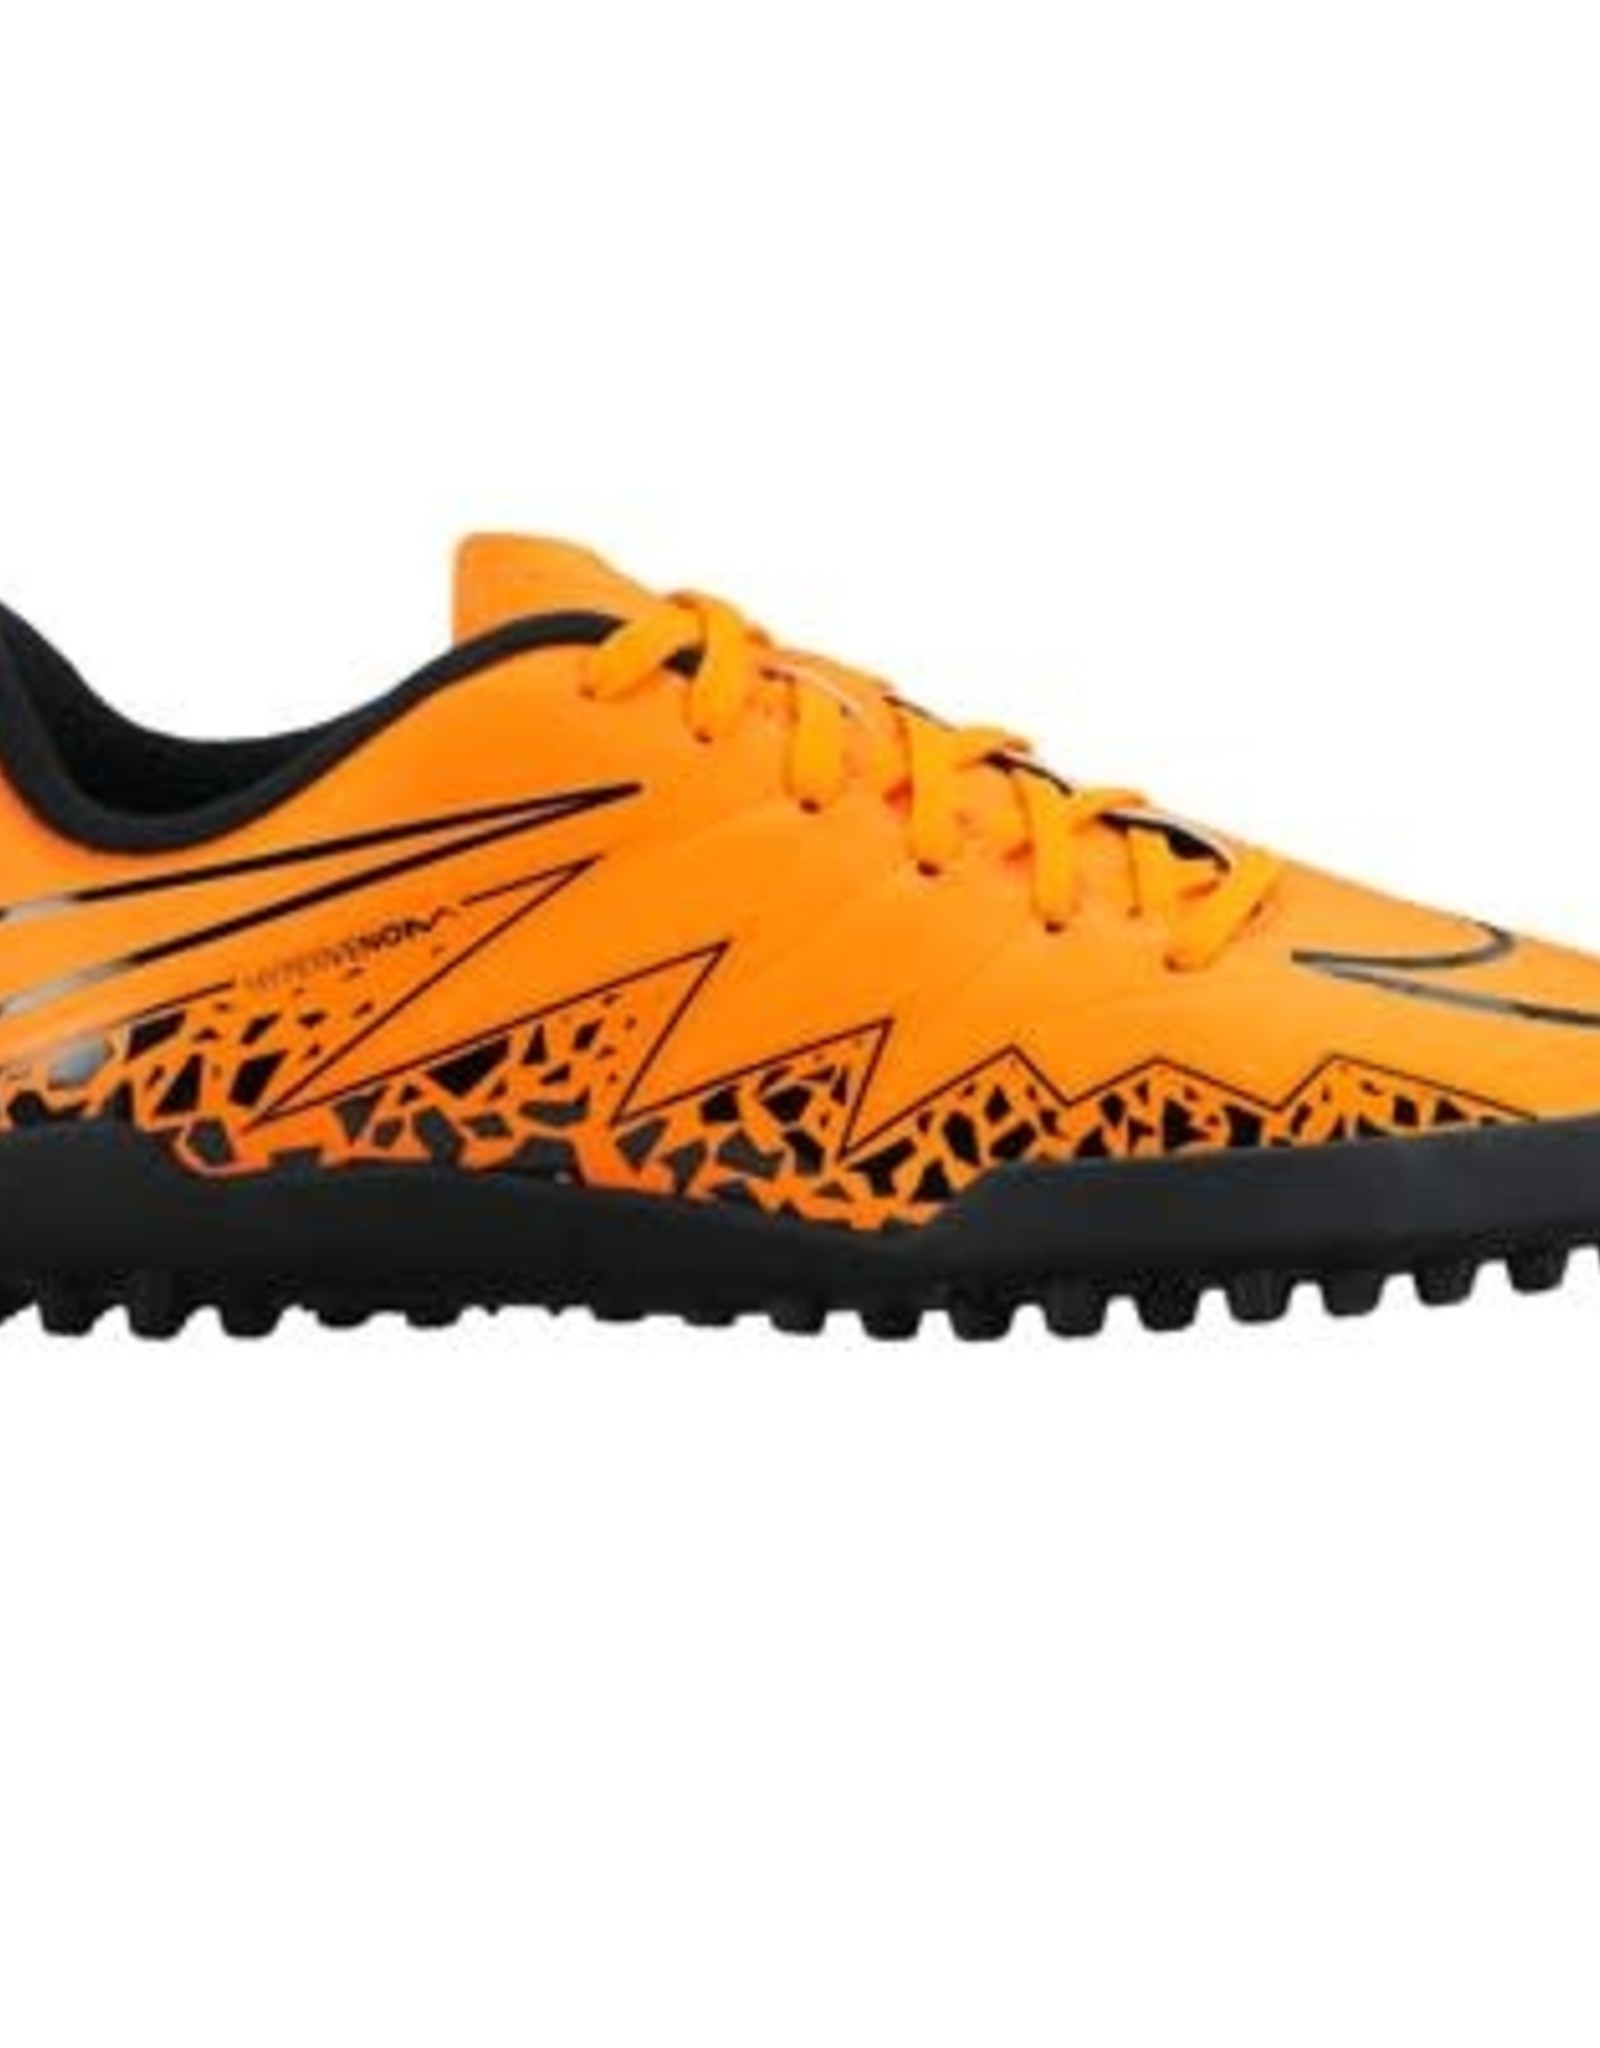 Nike Youth Hypervenom Phelon 11 Turf Orange/Black, textured, leather-like  upper enhances ball touch. The anatomical design creates a glove-like fit  that enables agility. Turf rubber outsole for use on turf and hard